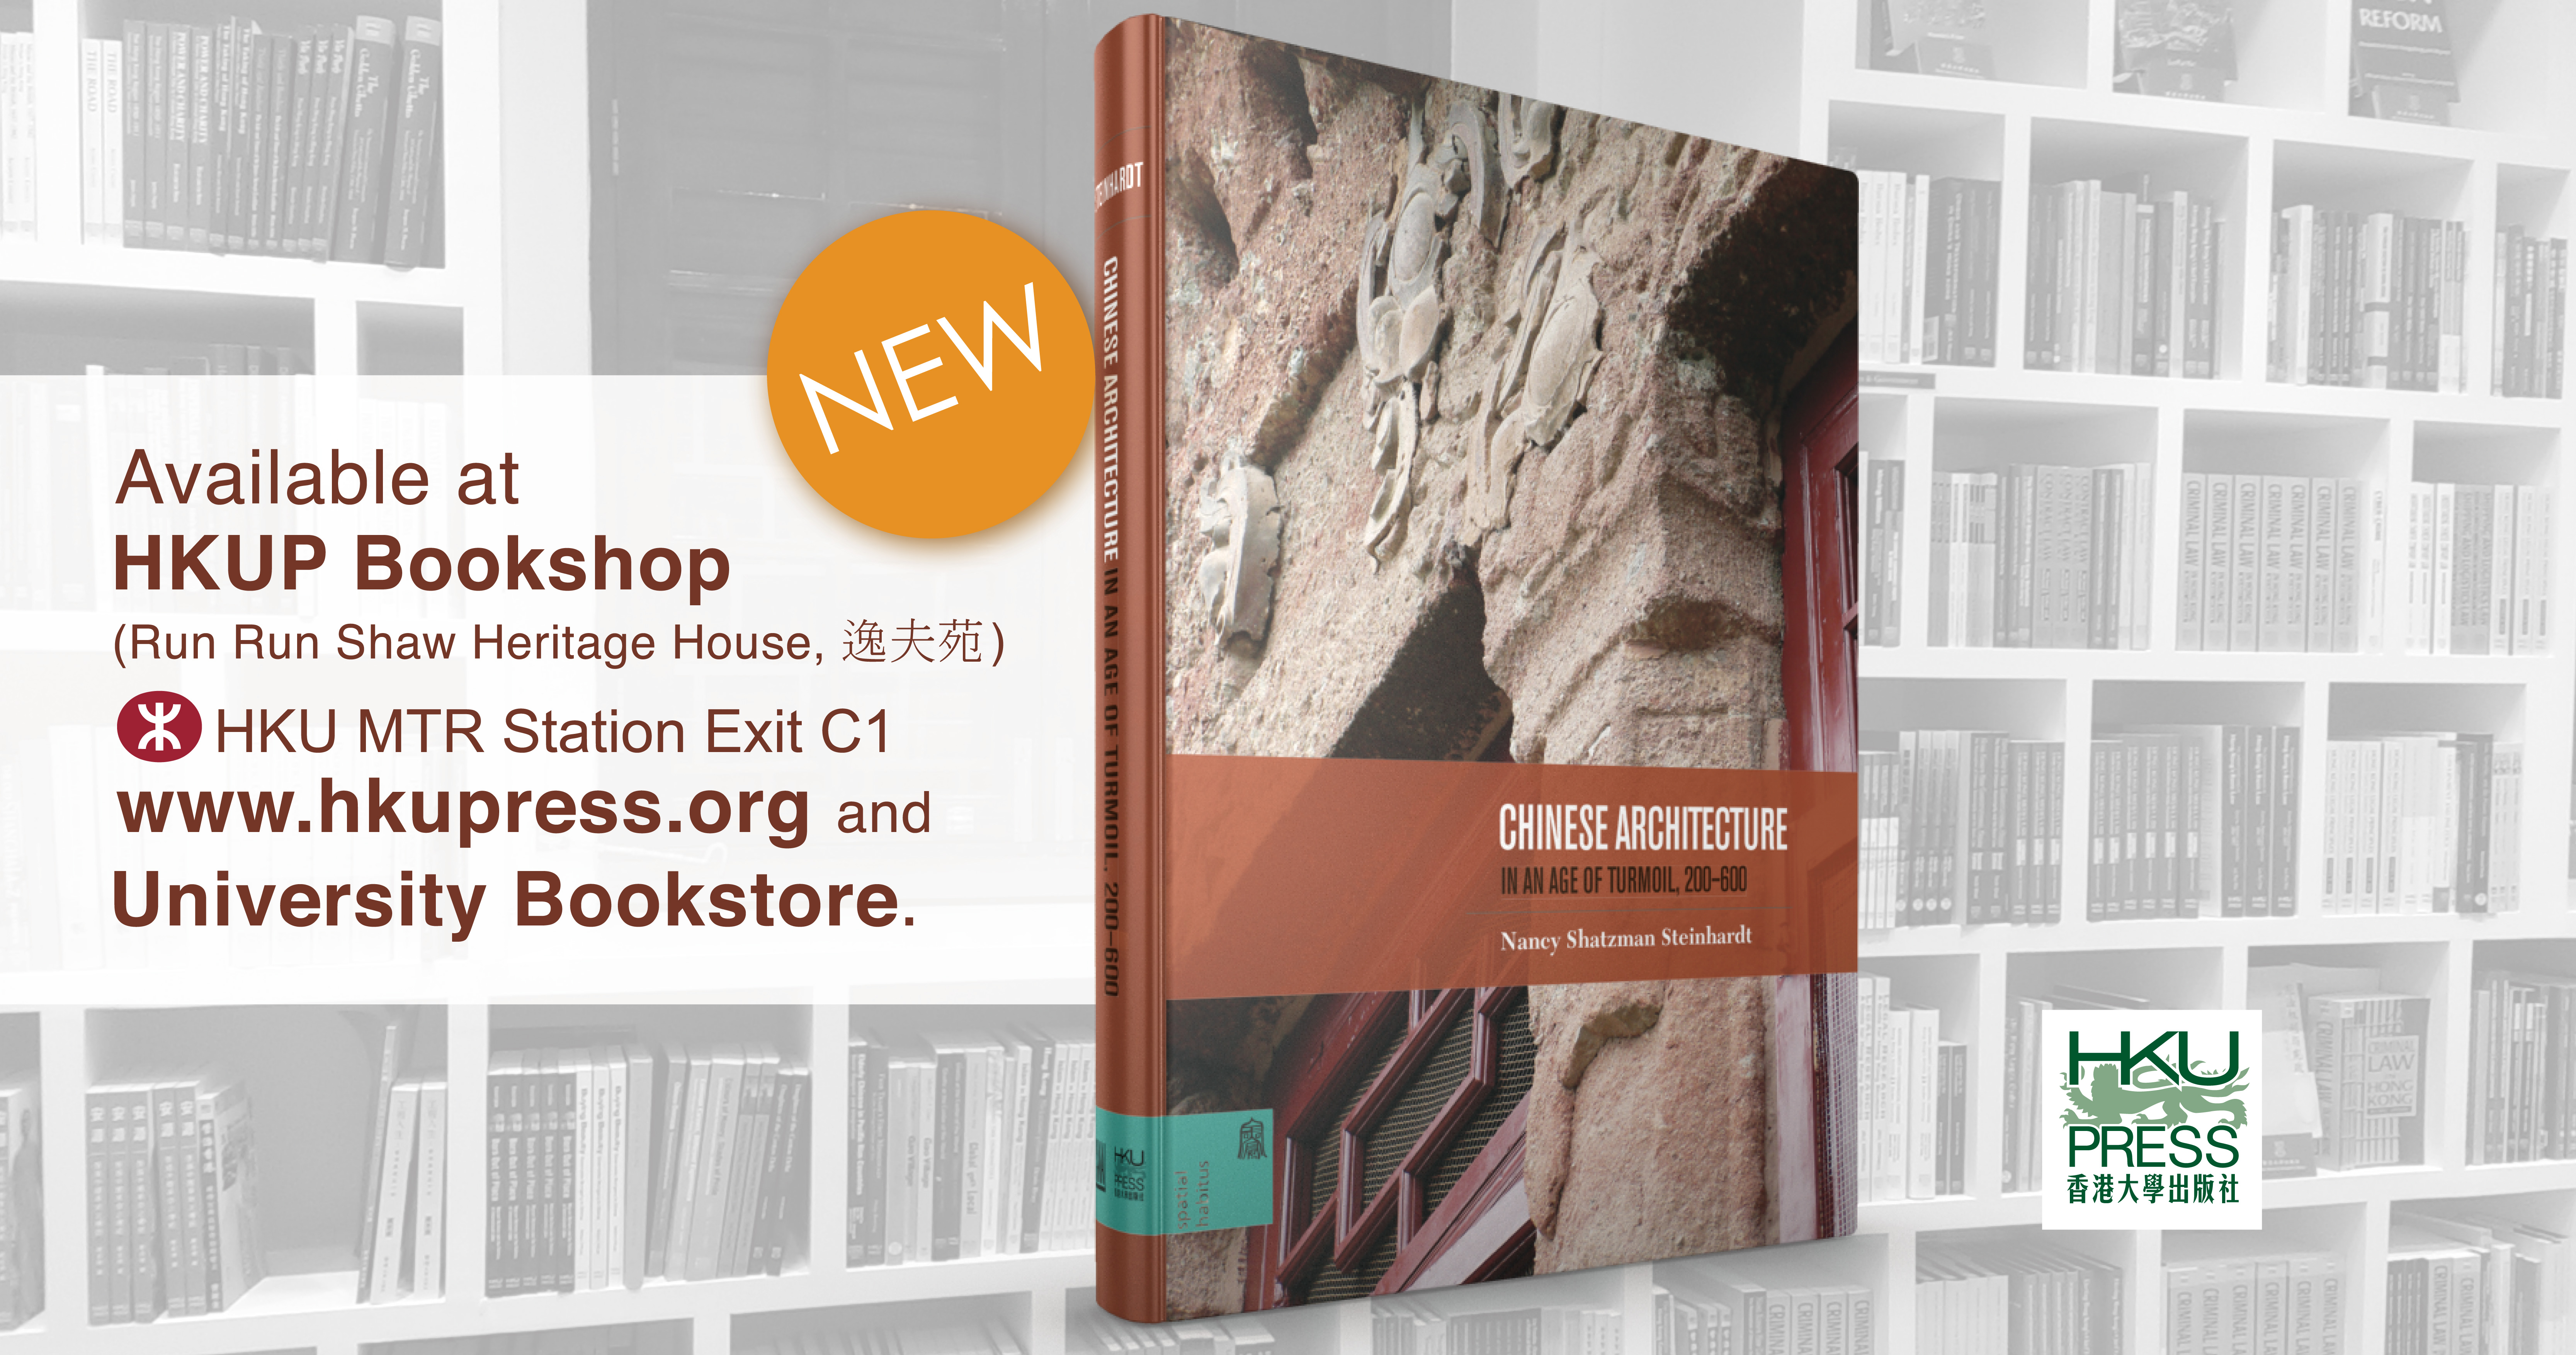 NEW BOOK - Chinese Architecture in an Age of Turmoil, 200-600